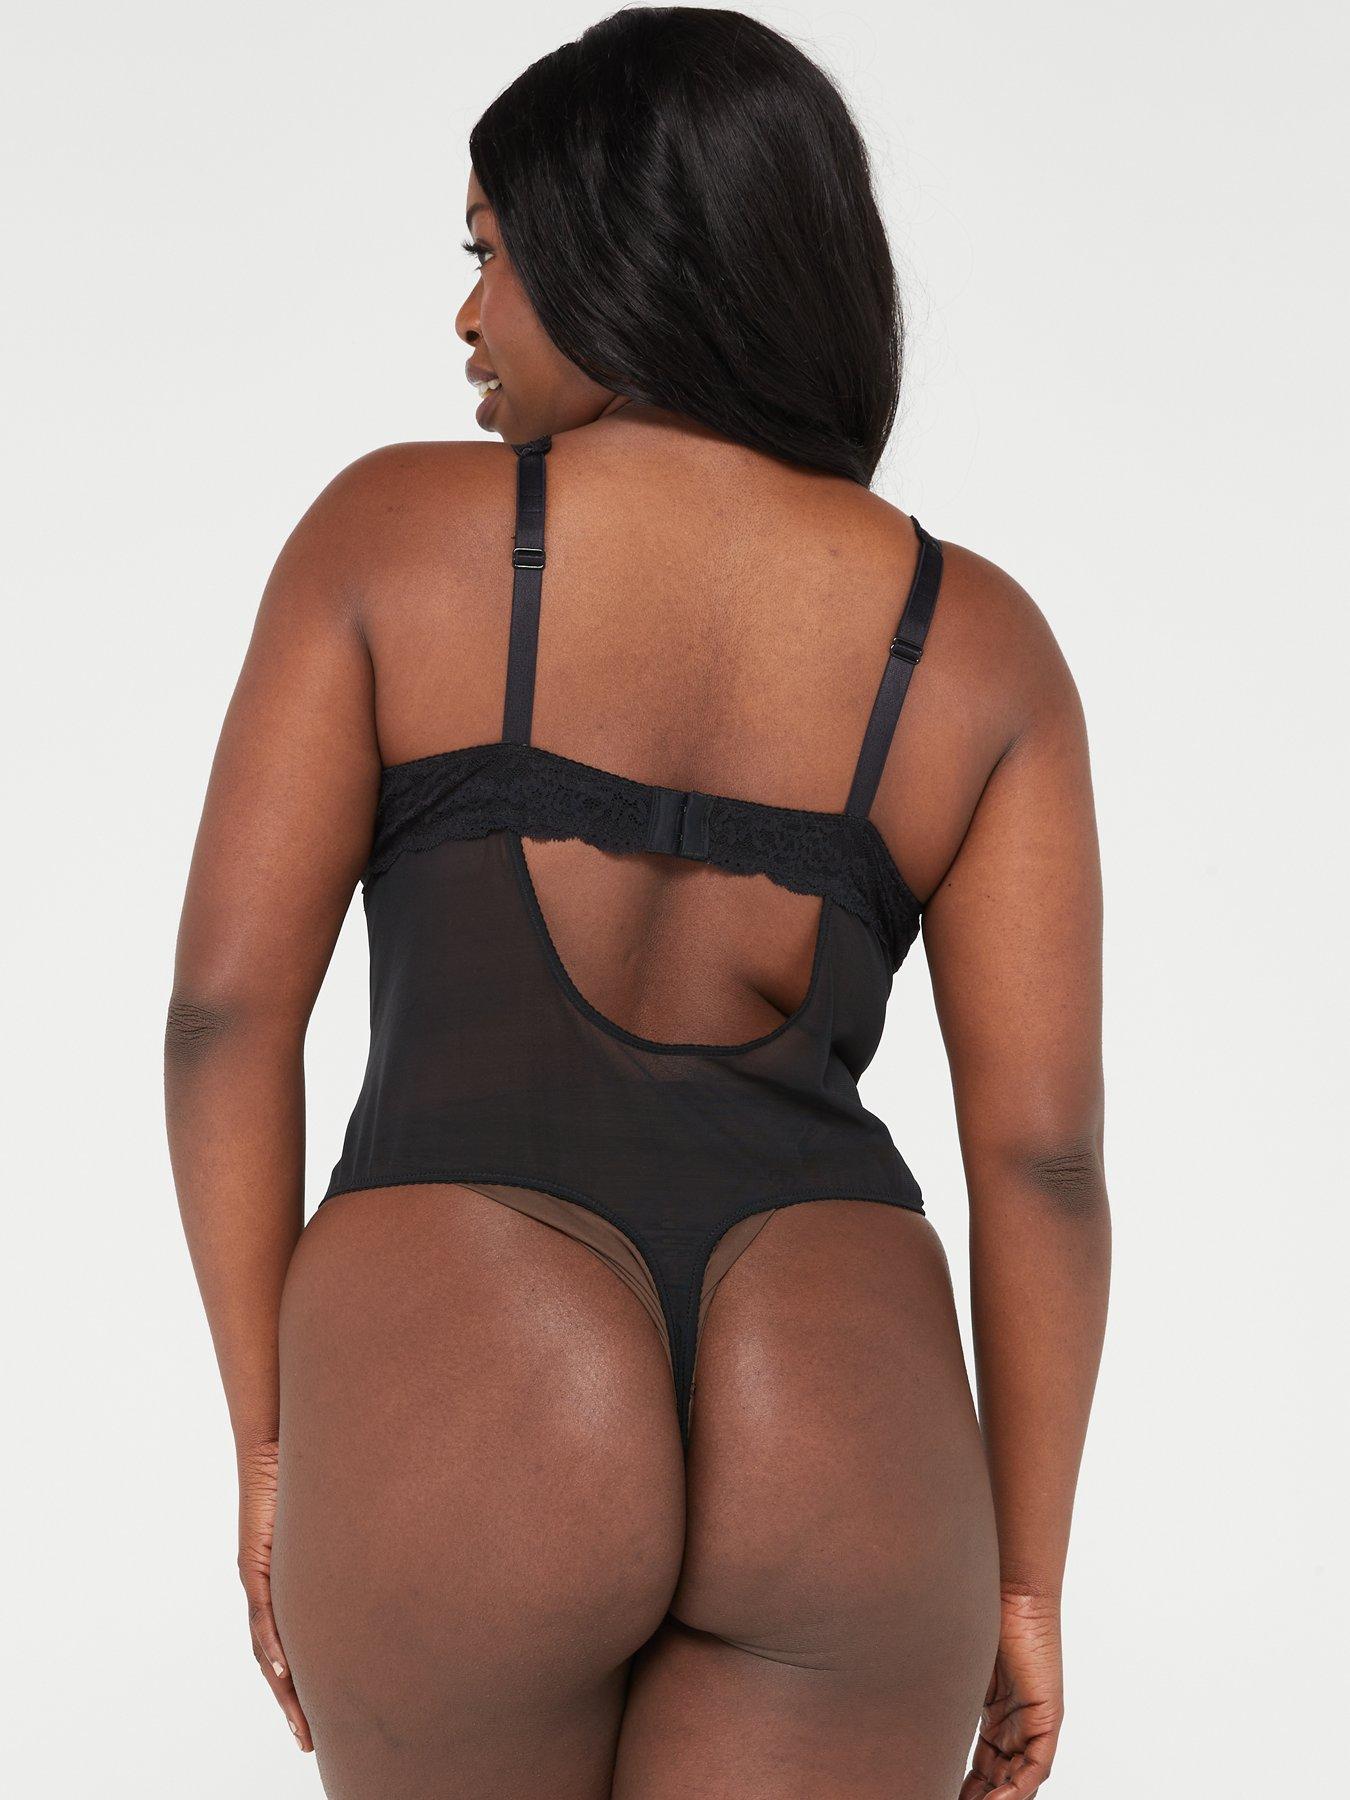 Ivory Rose Curve lace underwired mesh thong bodysuit in black